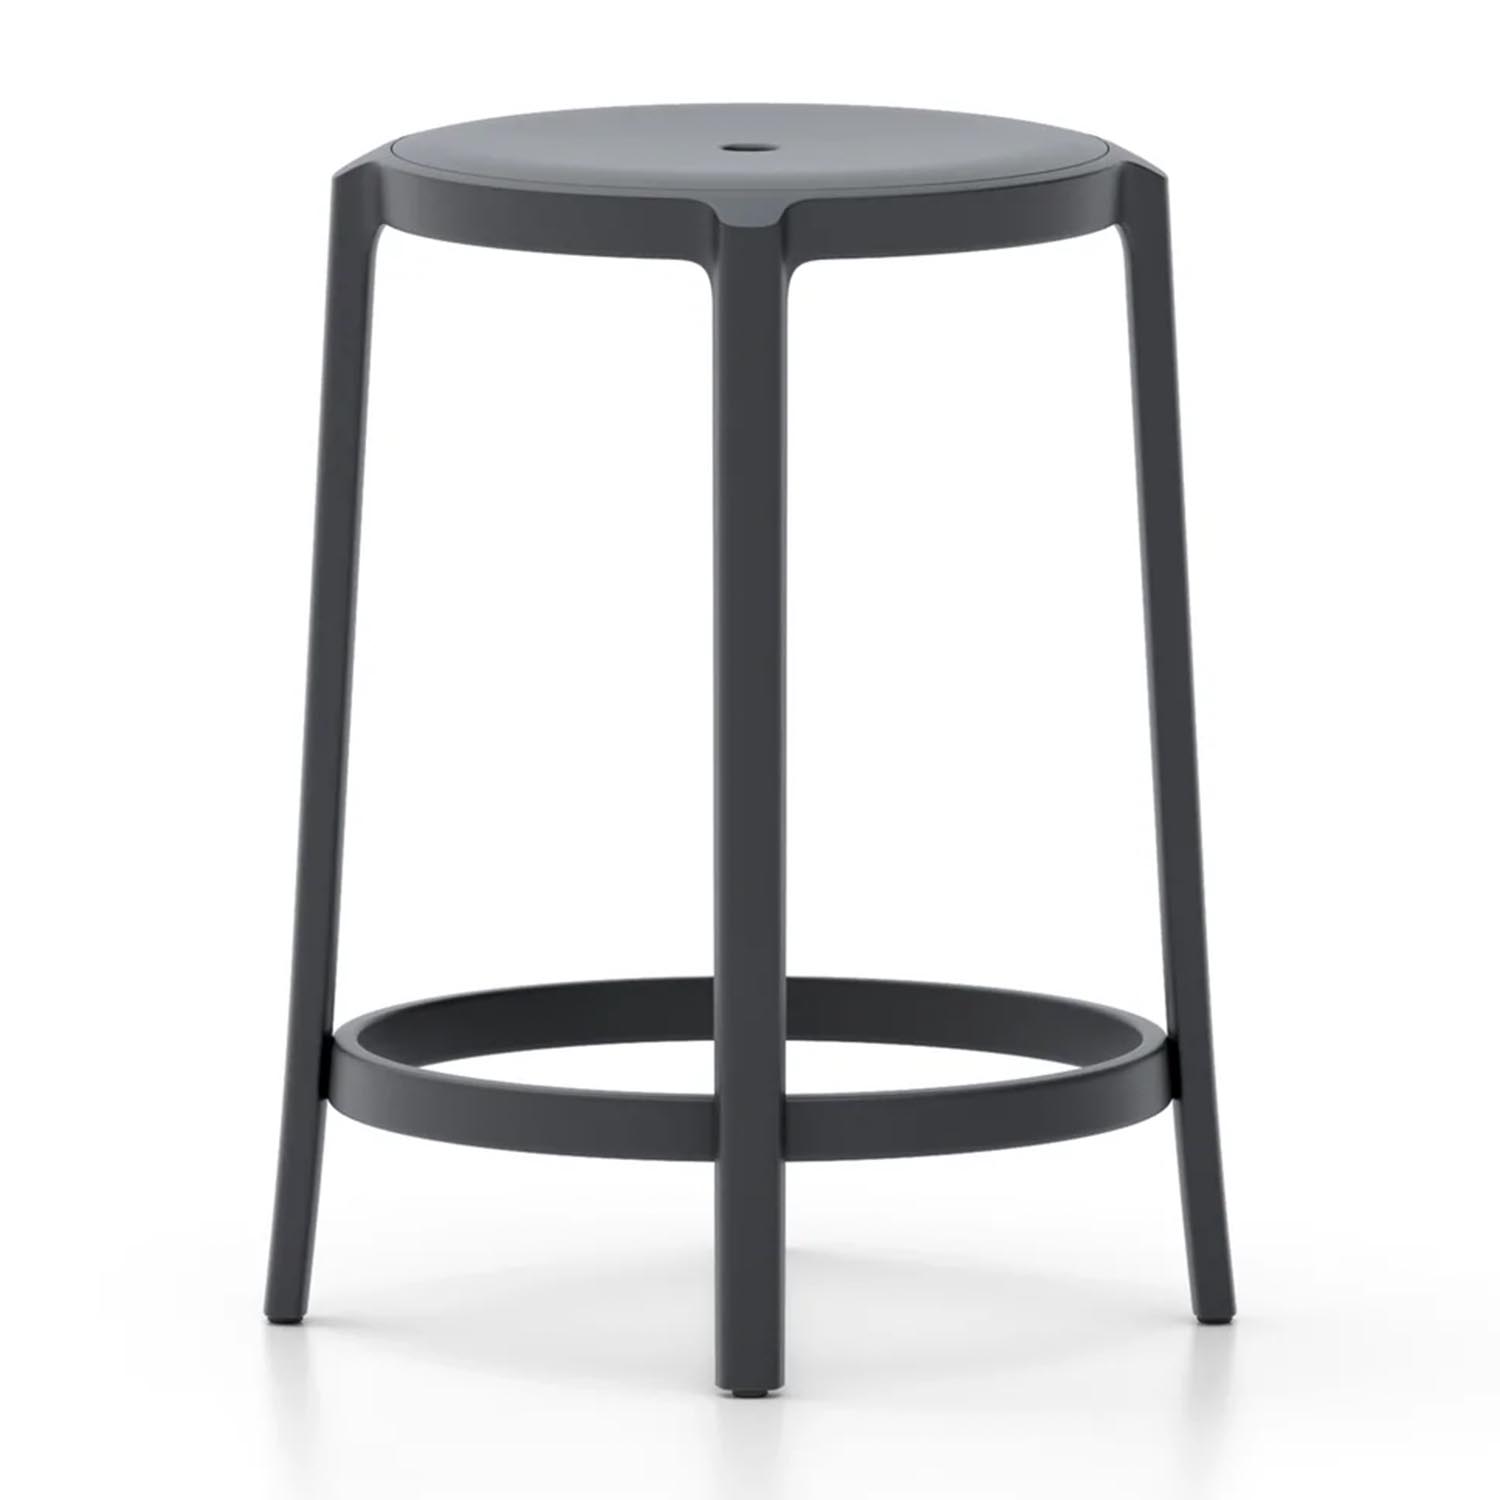 On & On Recycled PET Seat Counter Stool Hochstuhl, Farbe black von Emeco